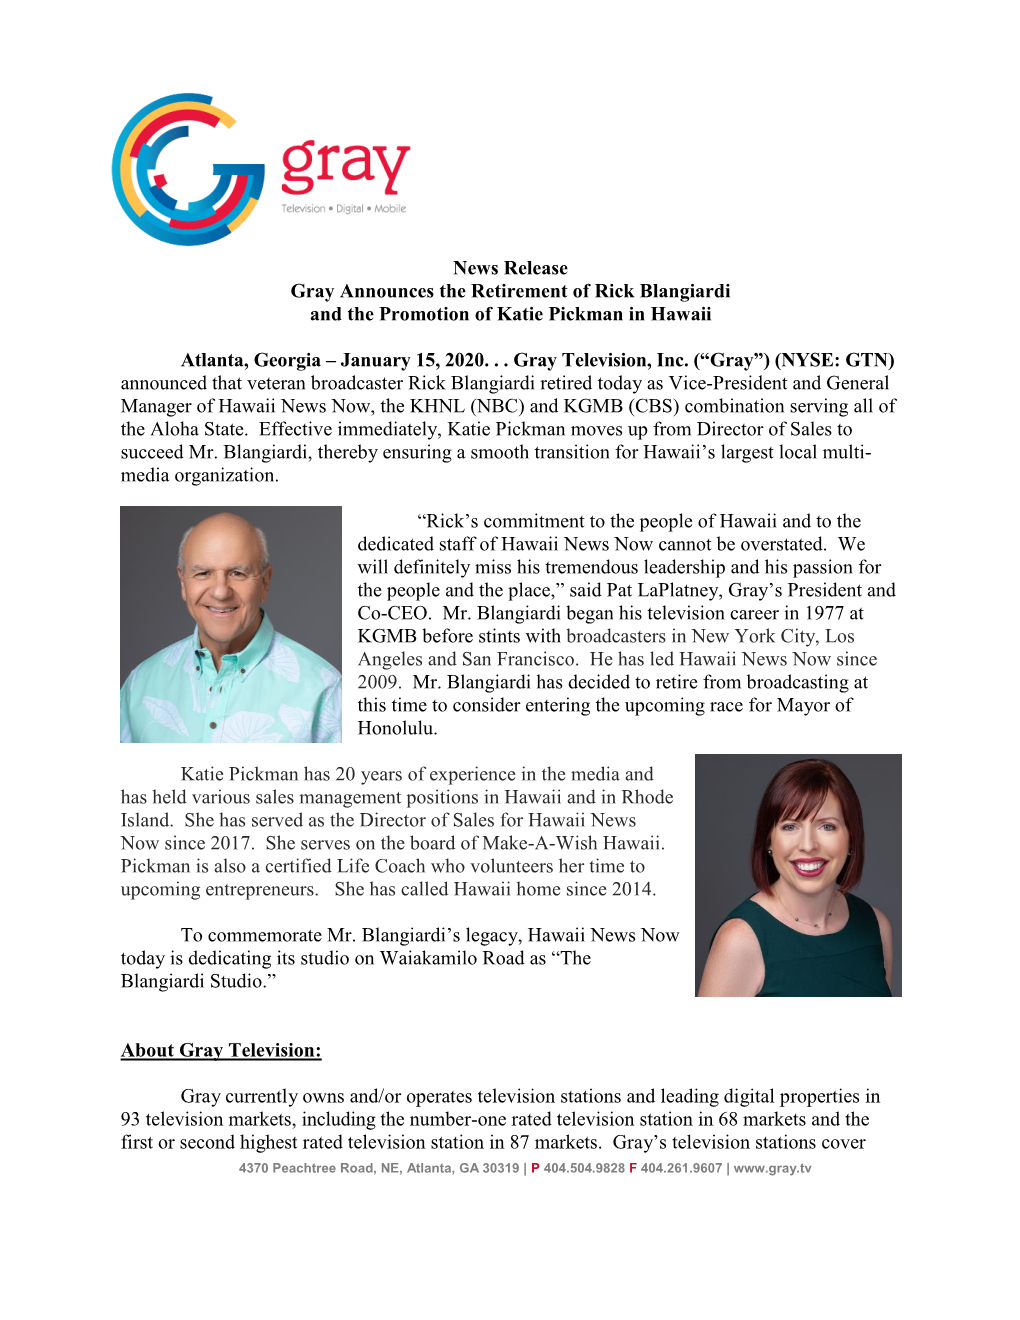 News Release Gray Announces the Retirement of Rick Blangiardi and the Promotion of Katie Pickman in Hawaii